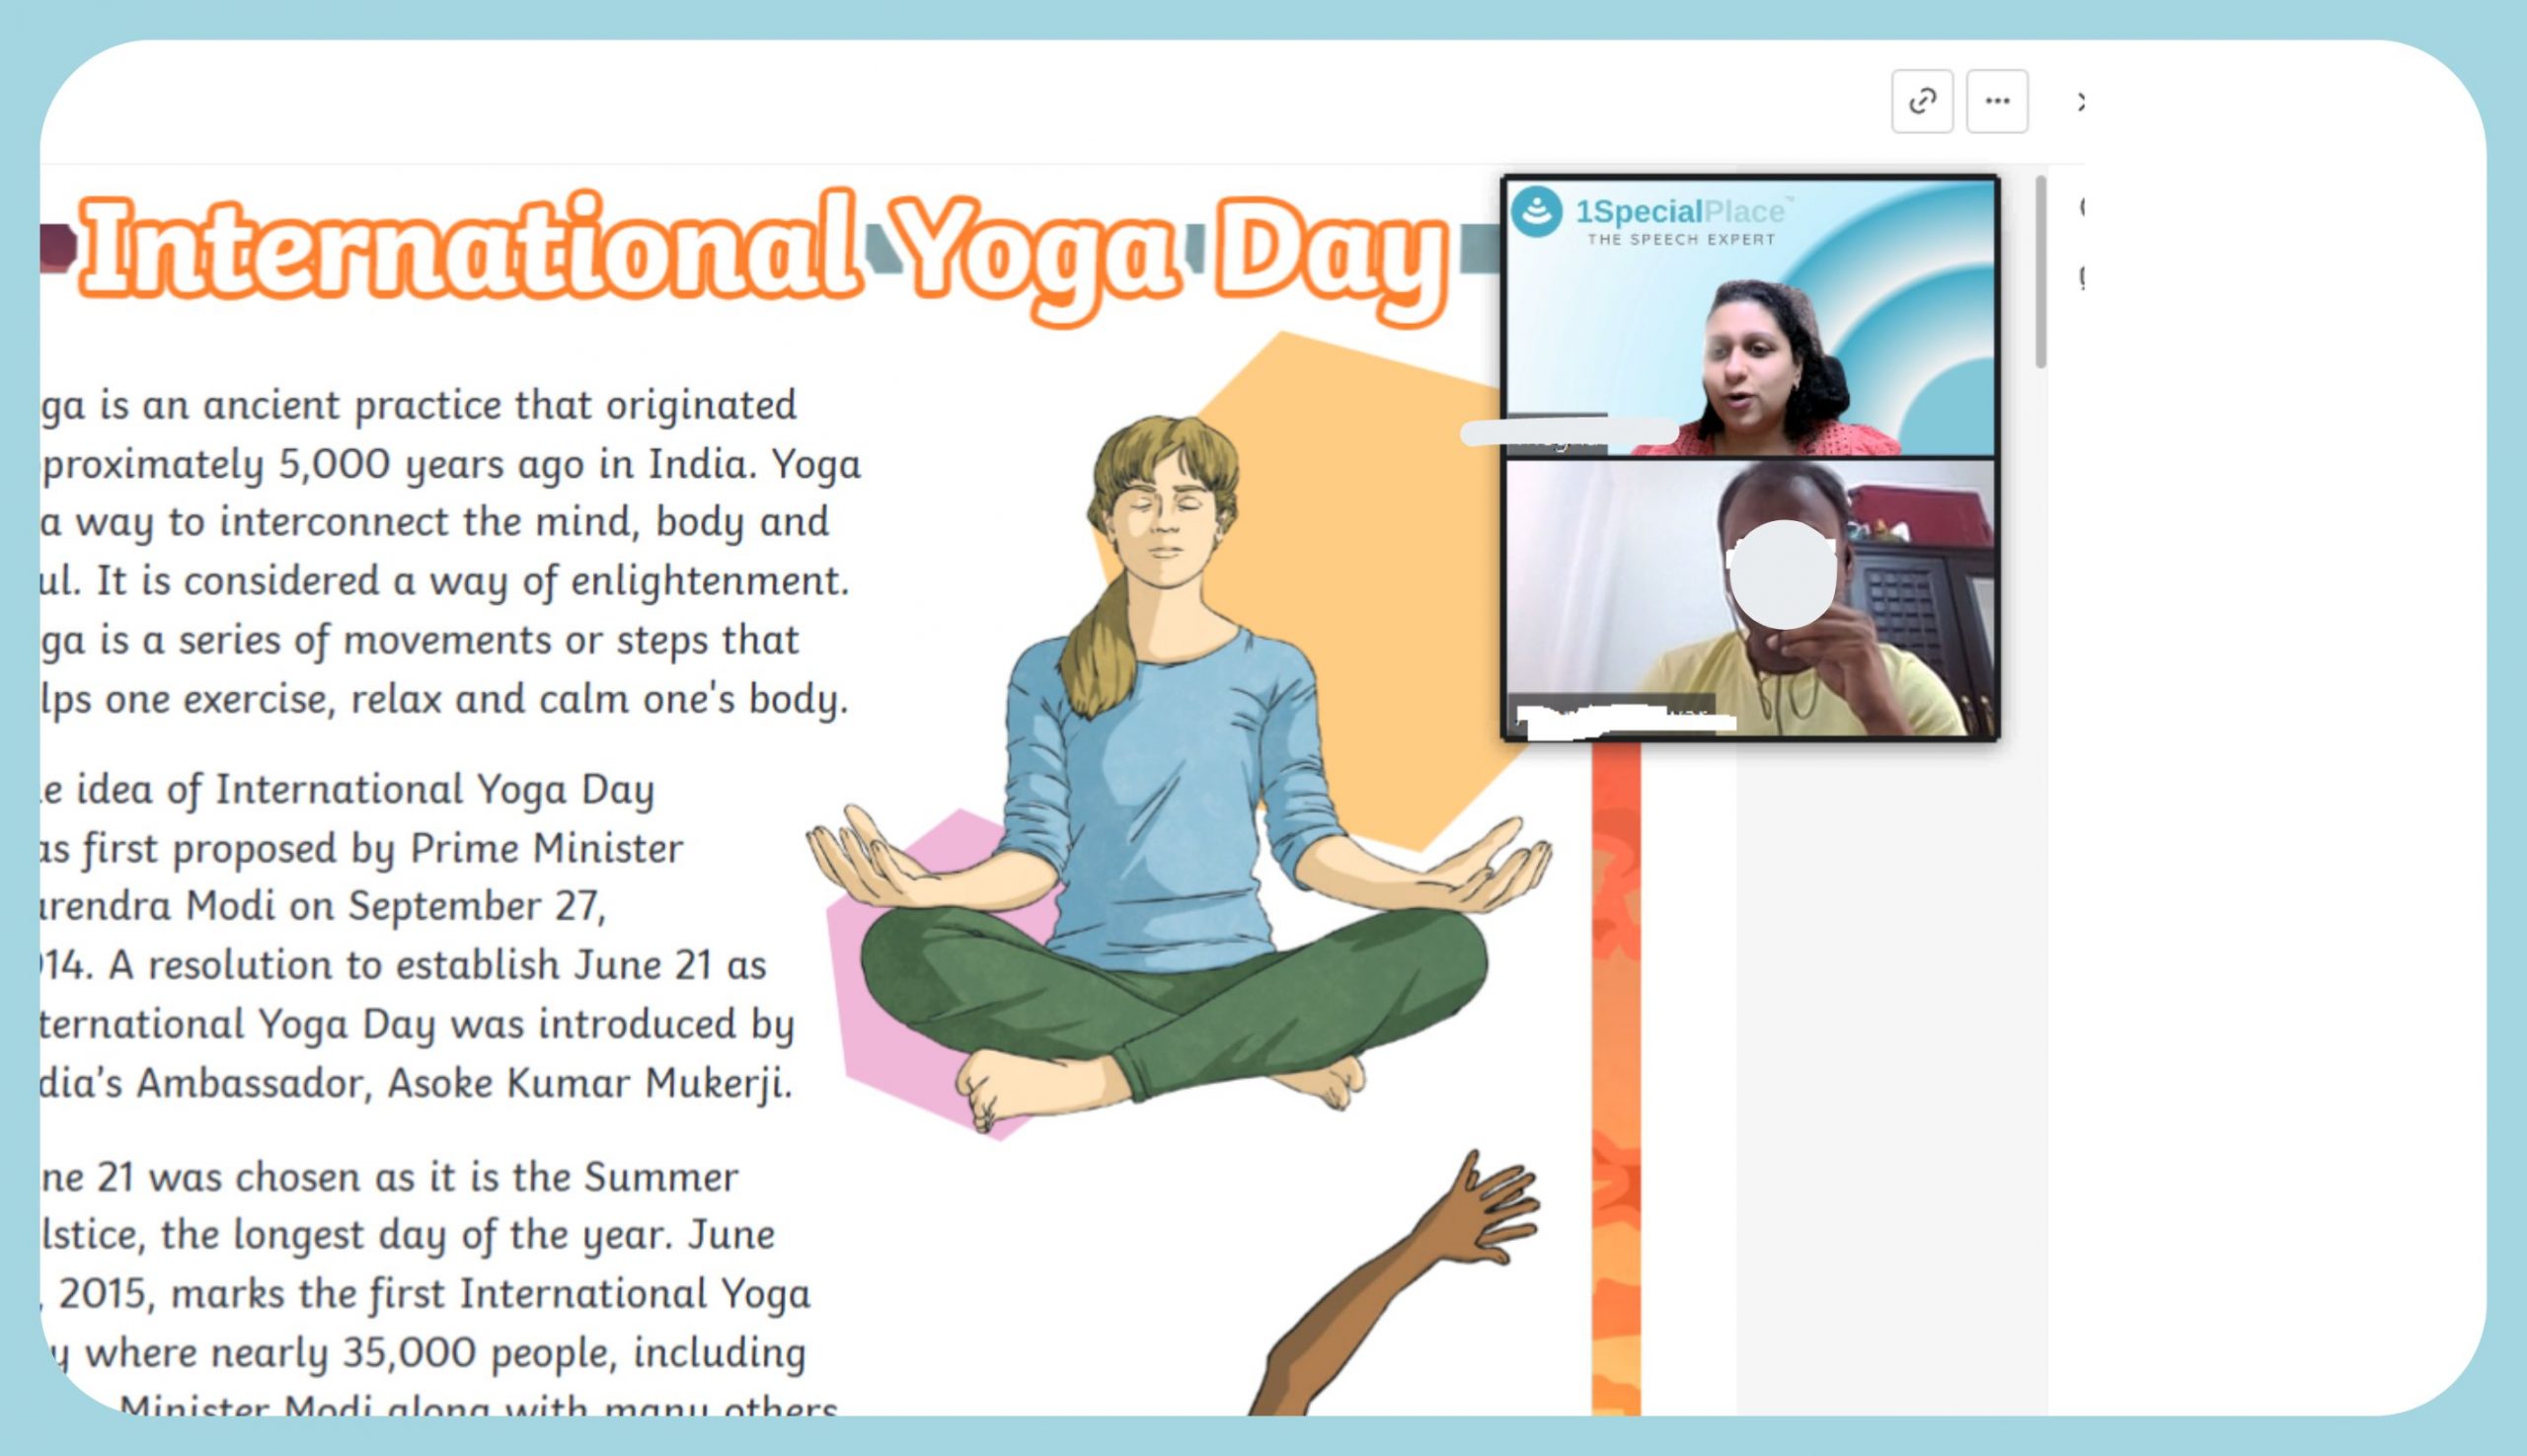 Yoga day activity with 1specialplace